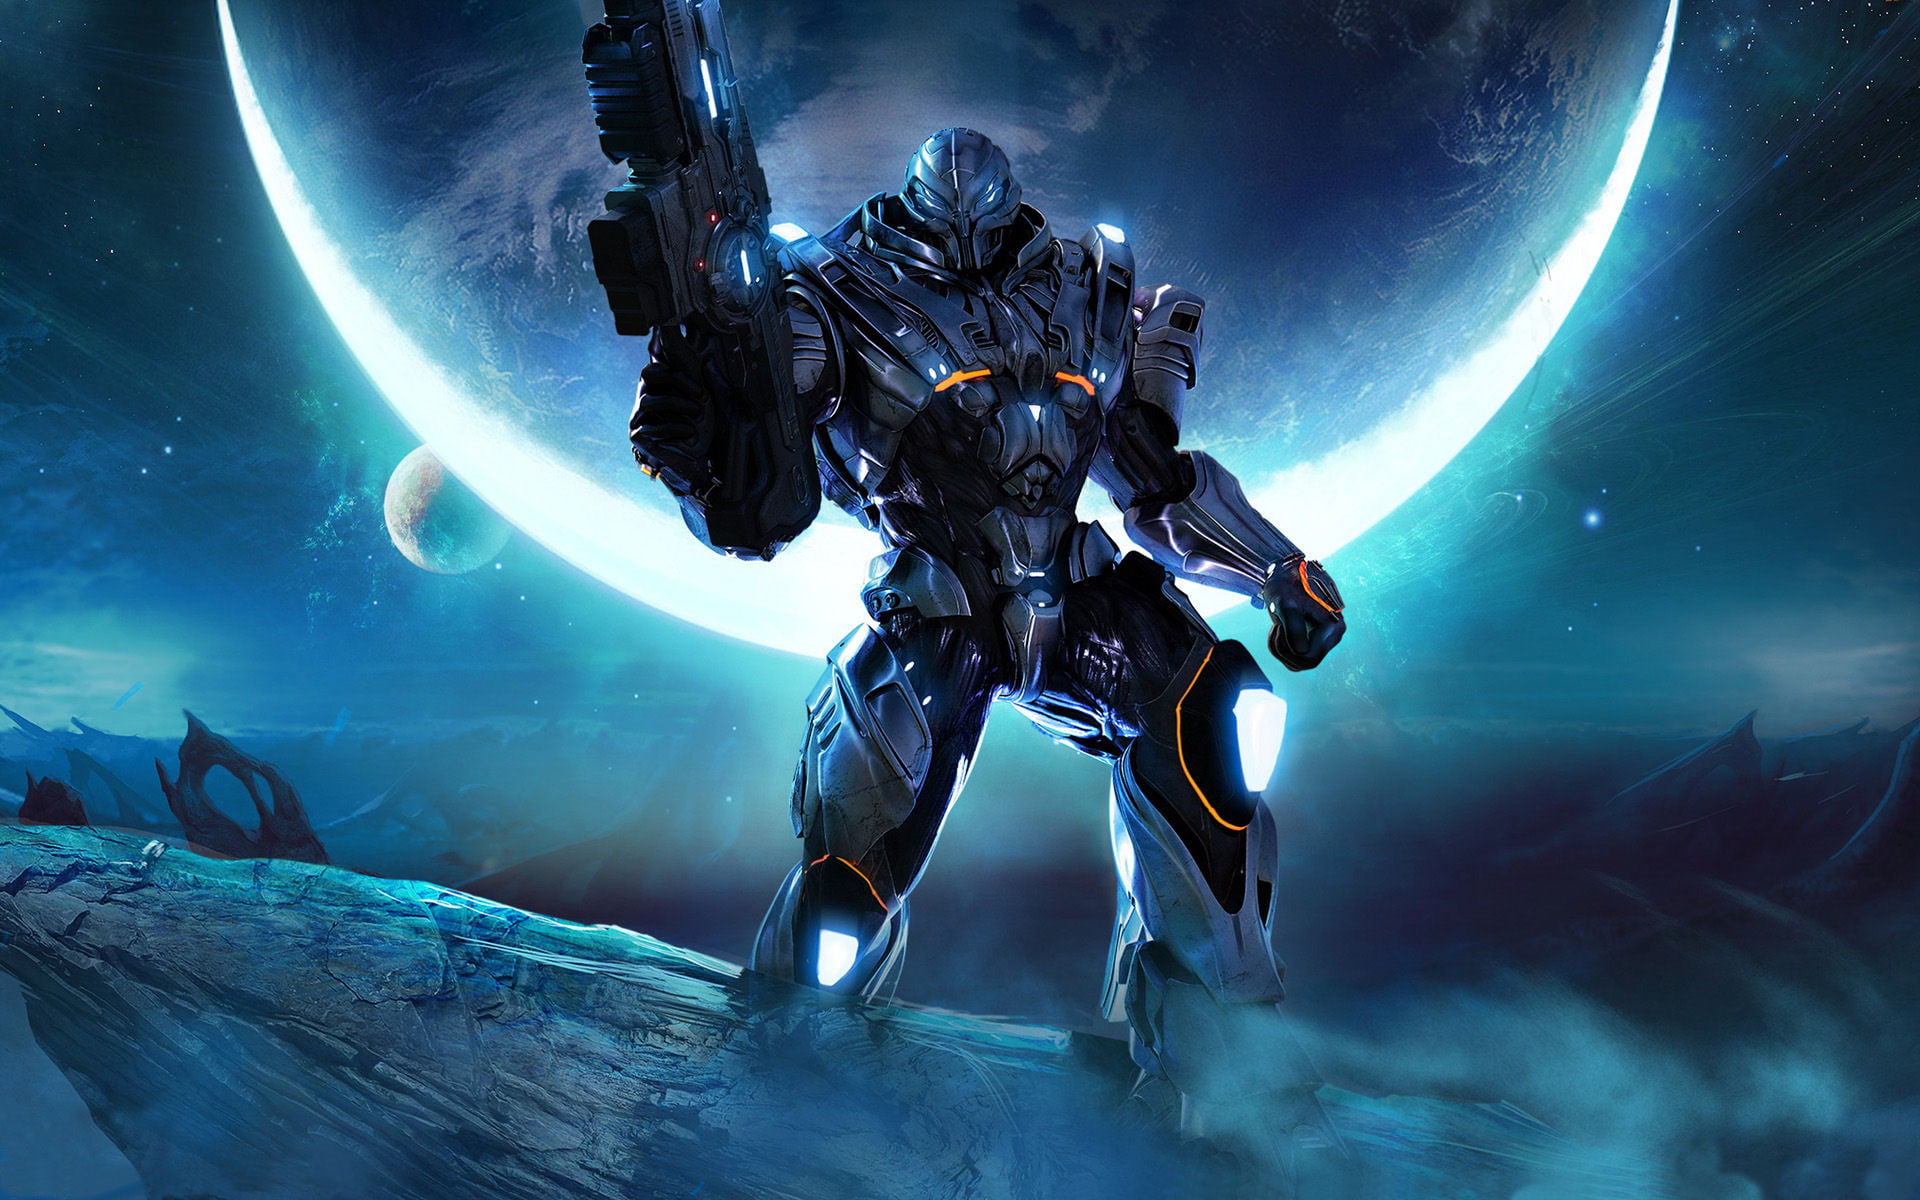 armored suit character digital wallpaper, planet, gun, Section 8